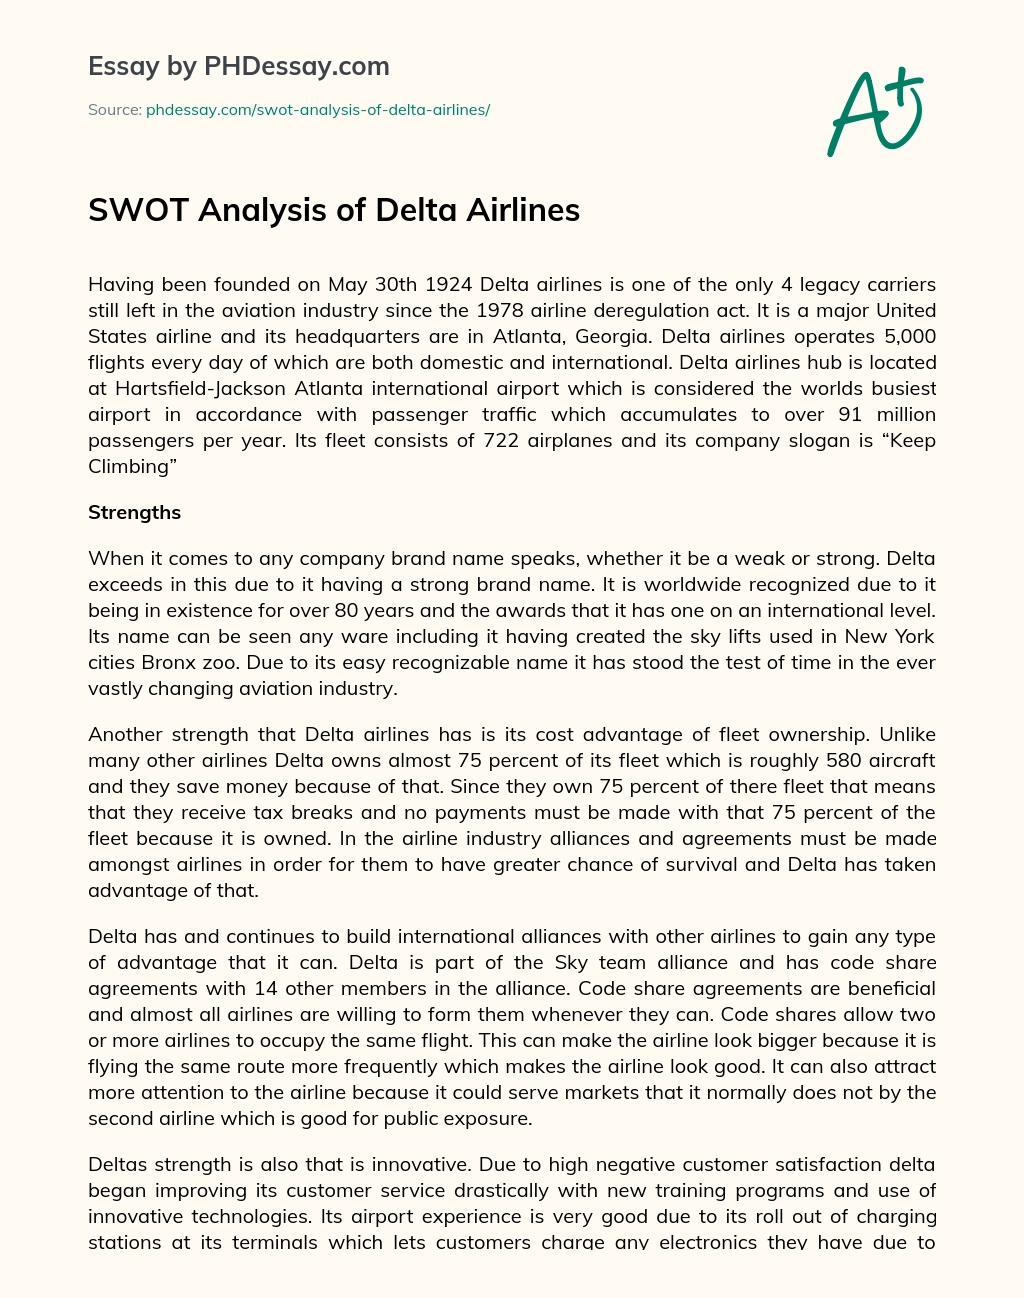 SWOT Analysis of Delta Airlines essay